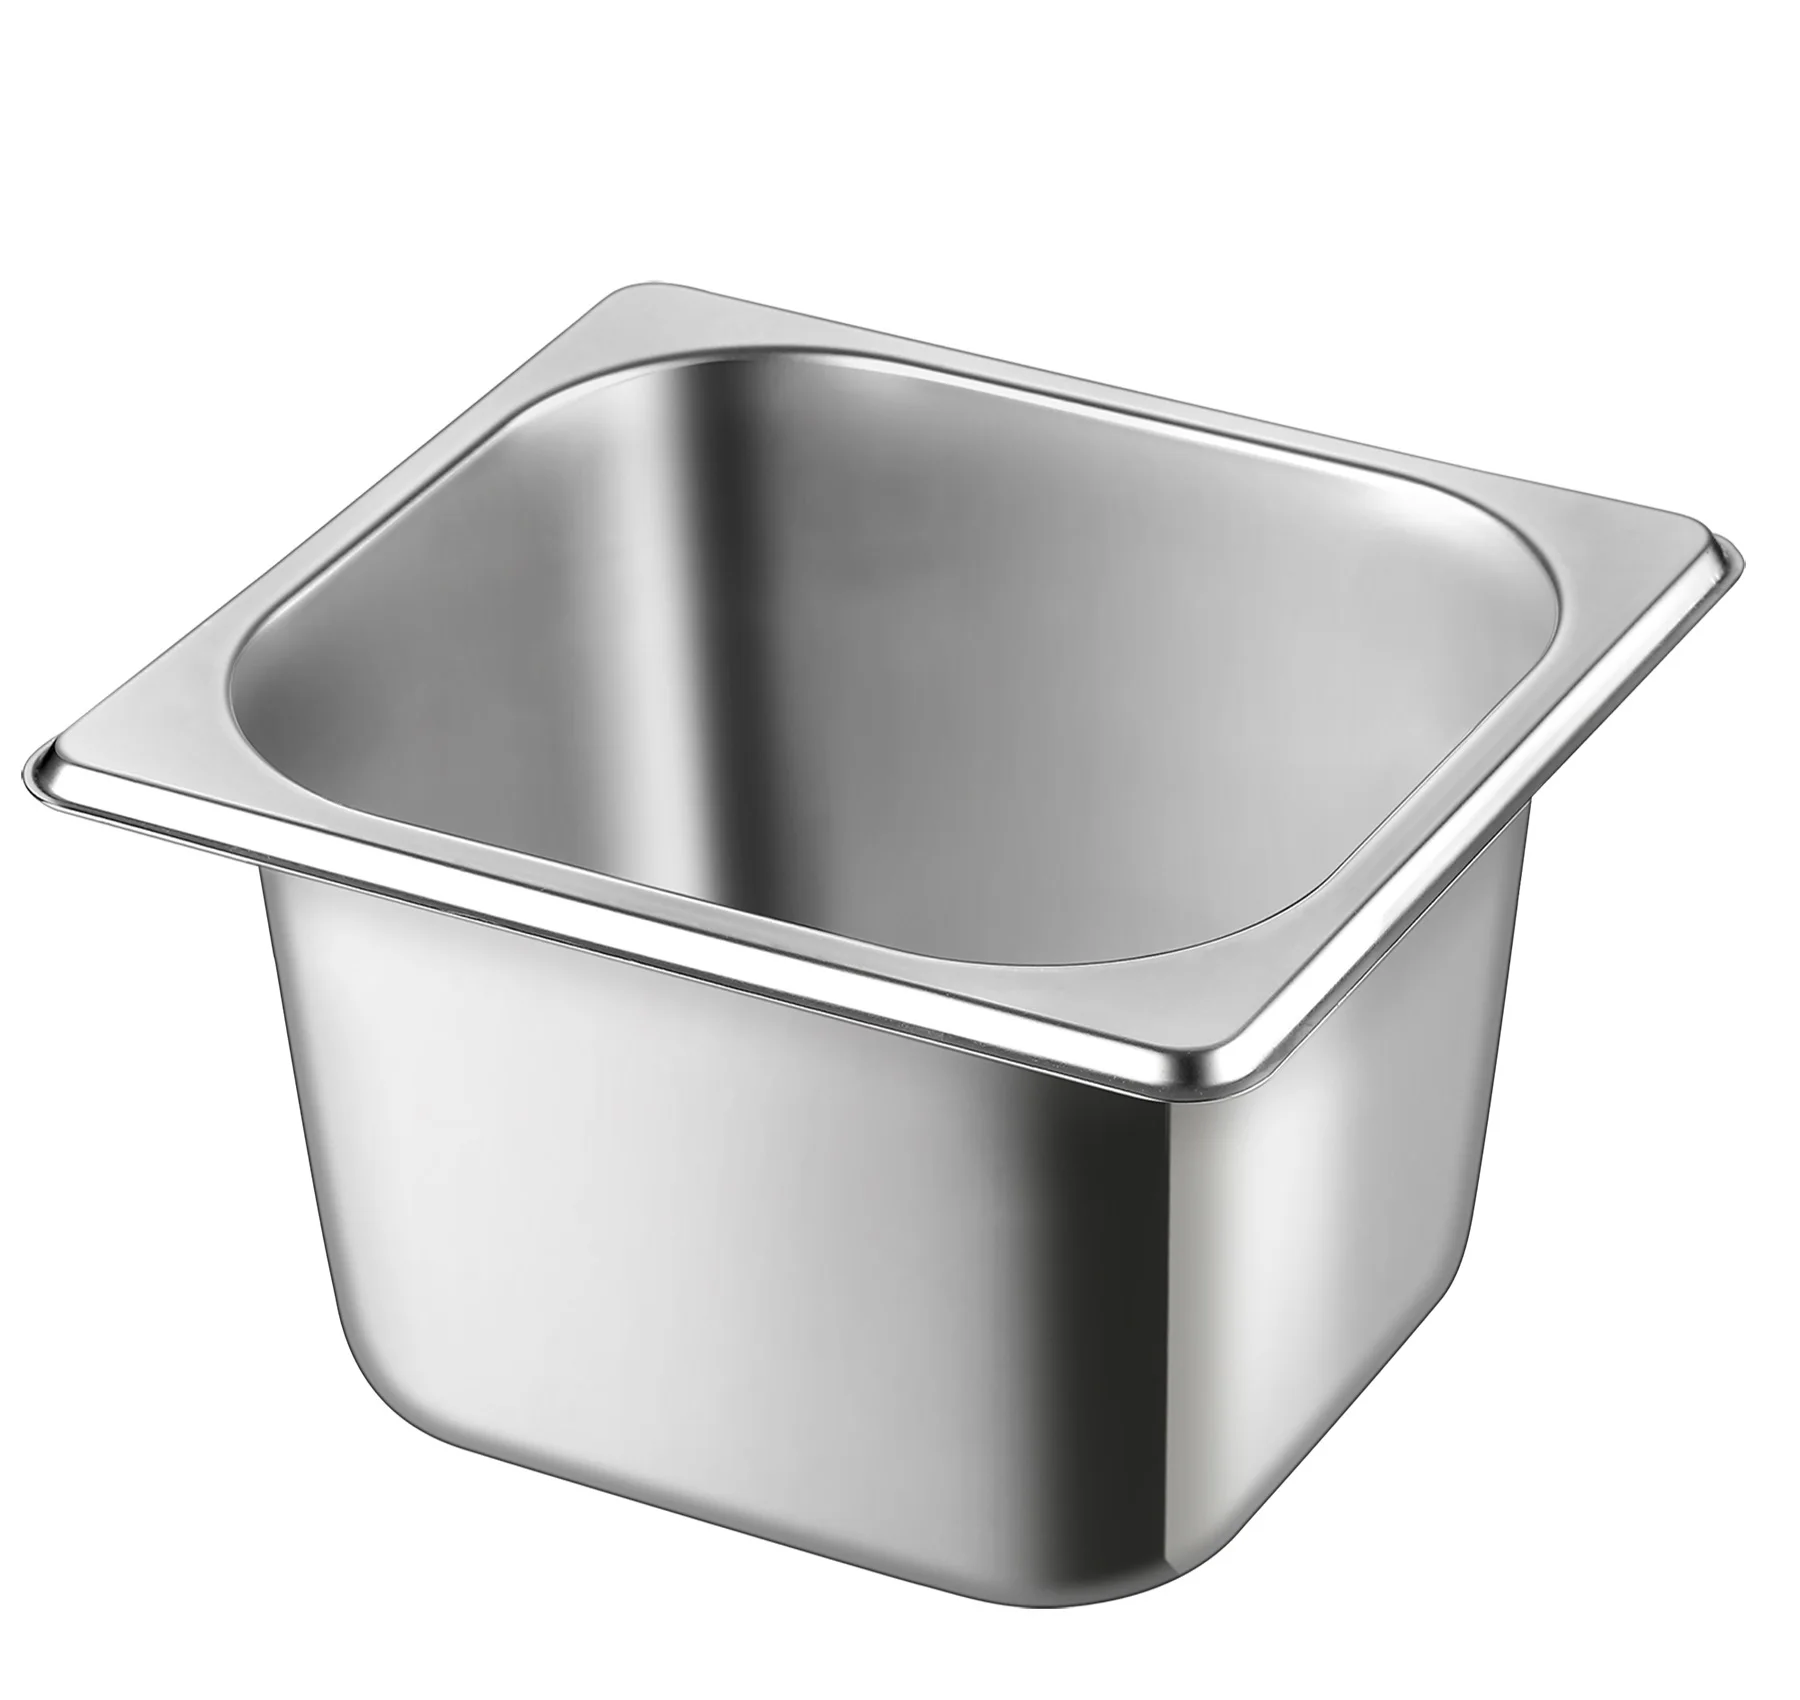 Pack of 10 Stainless Steel Gastronorm Container Kit 10 x 1/4 100mm Deep 